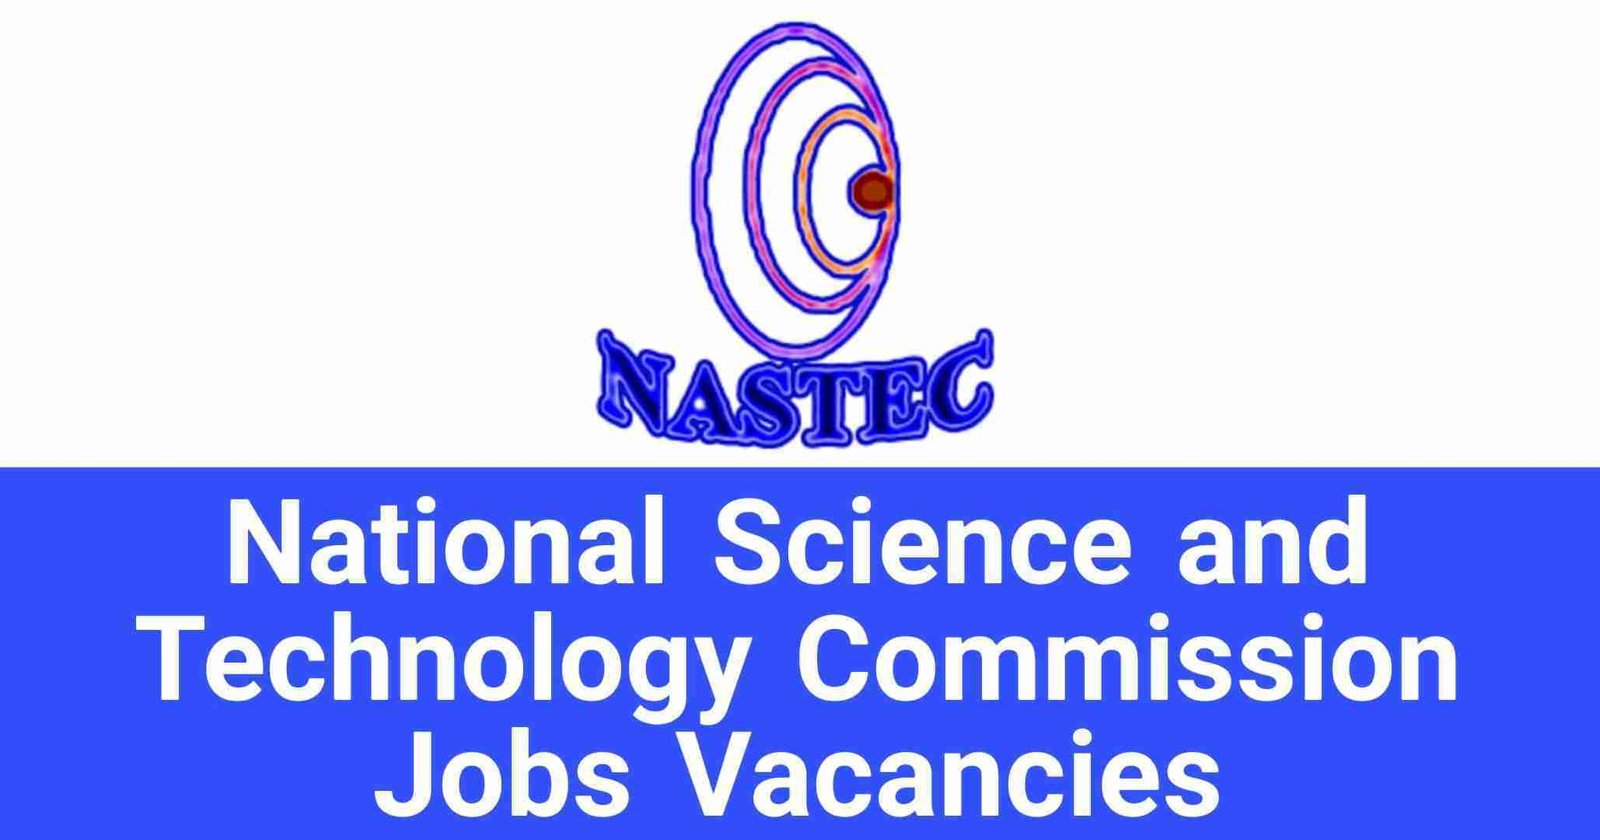 National Science and Technology Commission Jobs Vacancies